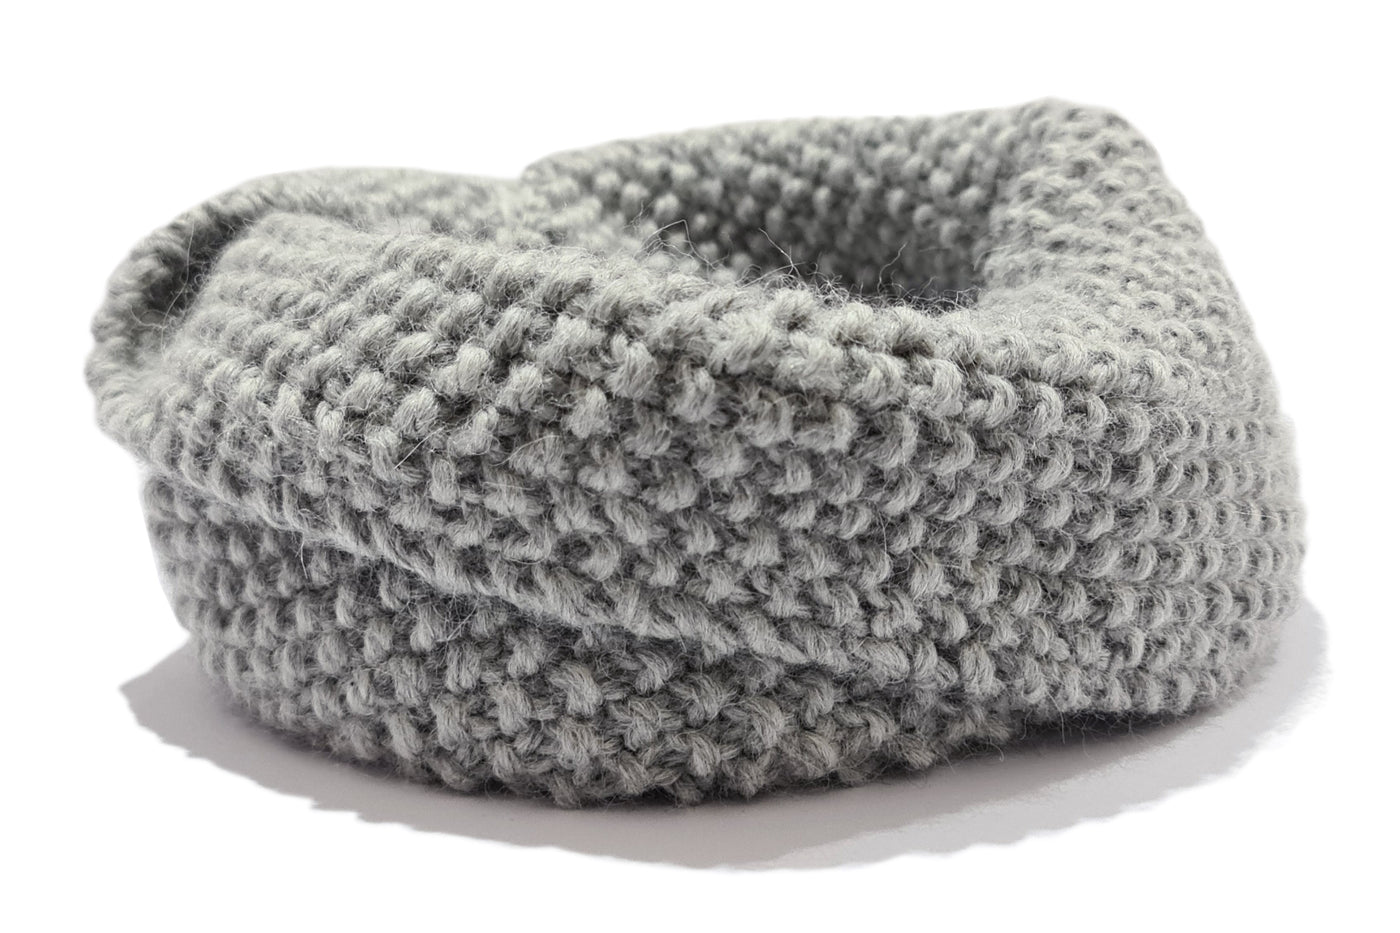 100% Baby Alpaca Hand Knitted Infinity Scarf - Light Grey Infinity Scarf Neck warmer RUFFNEK® Light Grey